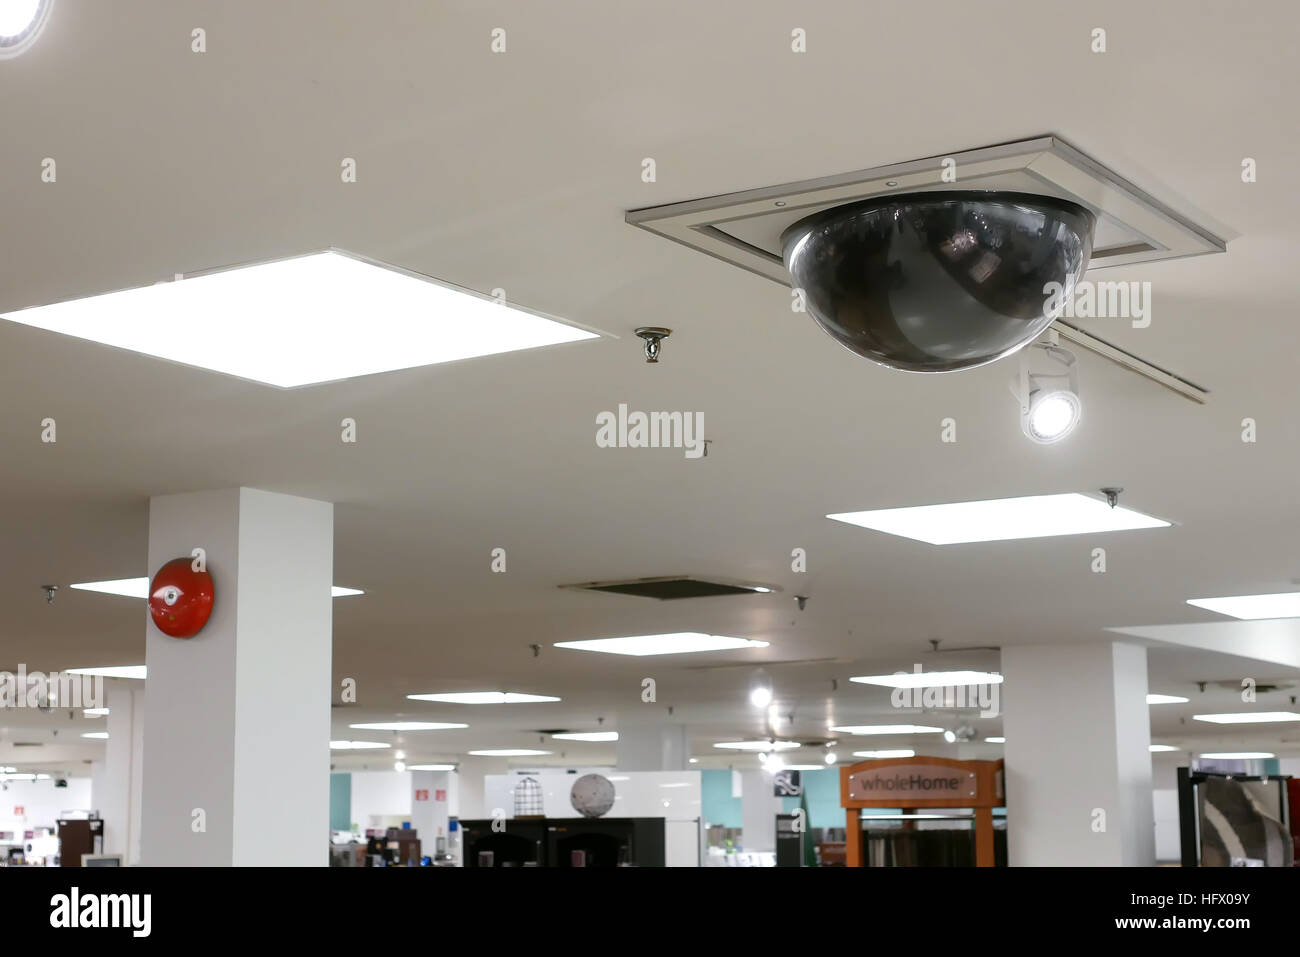 Burnaby, BC, Canada - December 06, 2016 : Dome security camera on top of ceiling inside Sears store Stock Photo